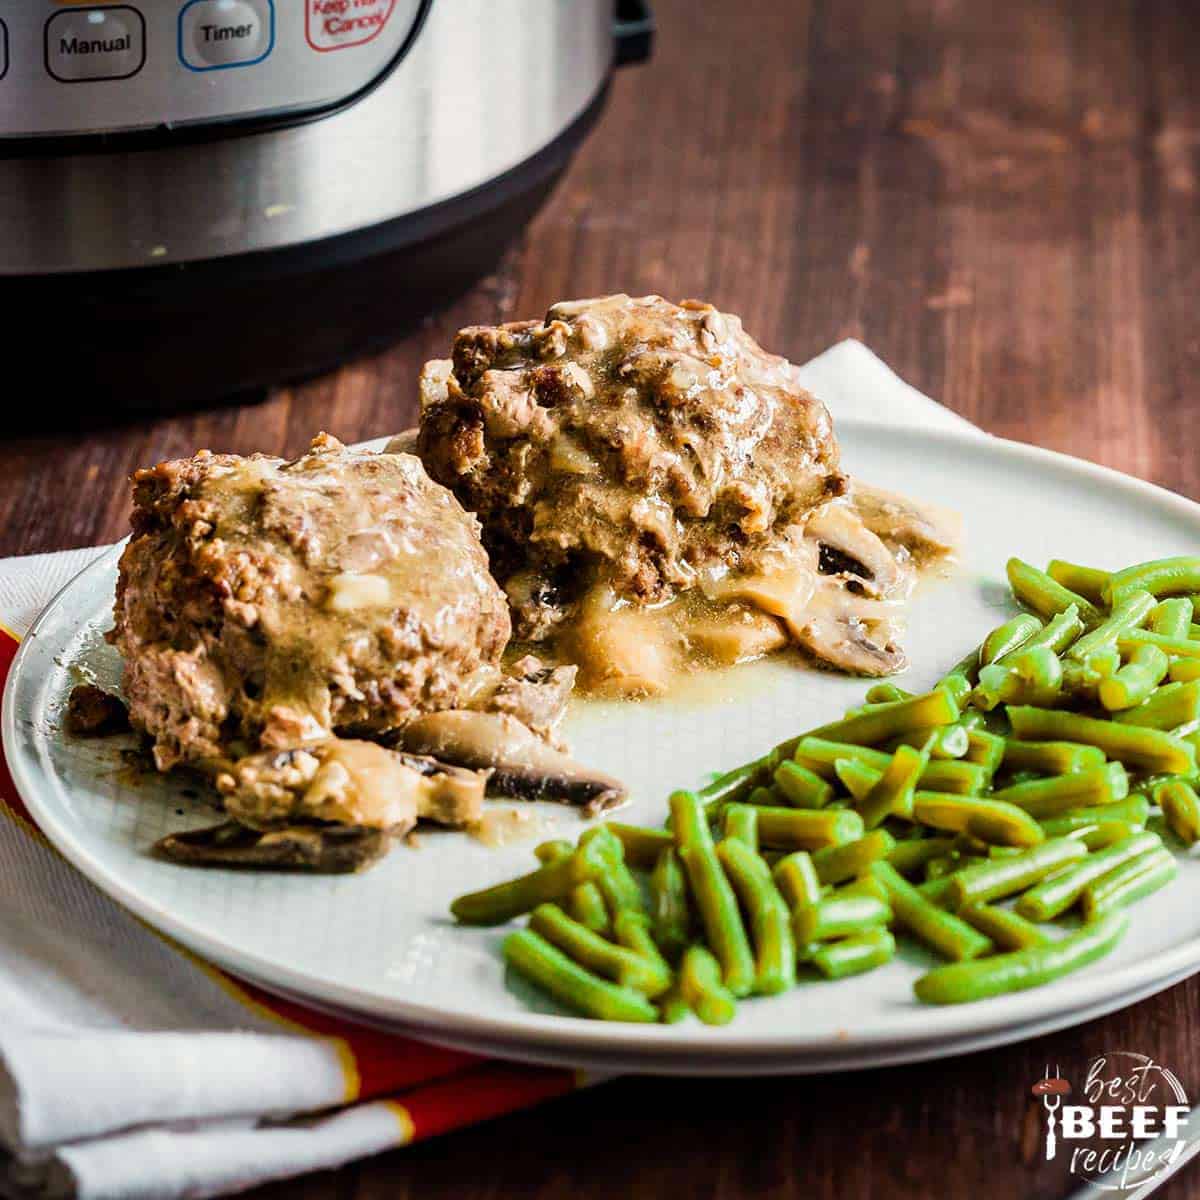 Two salisbury steaks on a white plate with green beans